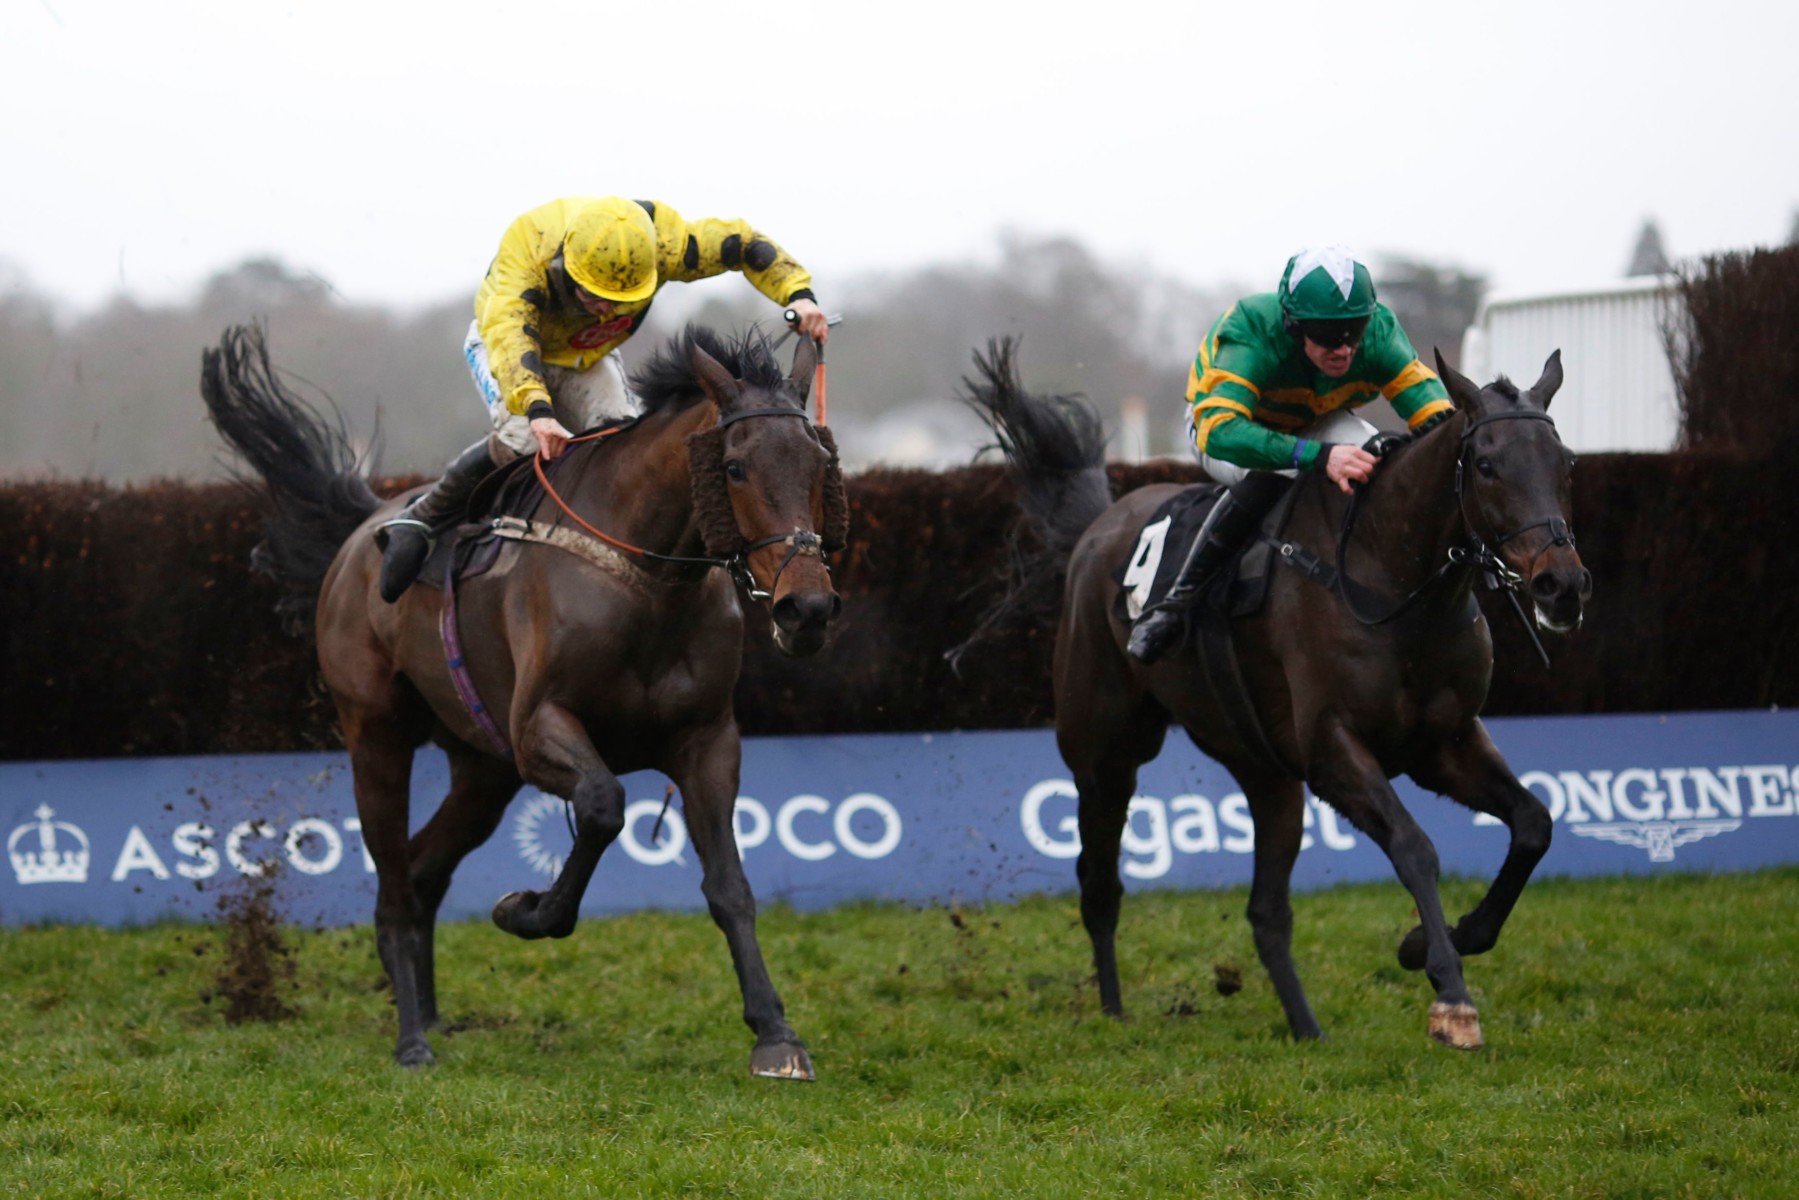 , Anthony Honeyball sweet on Sam Brown heading into Saturdays Reynoldstown at Ascot